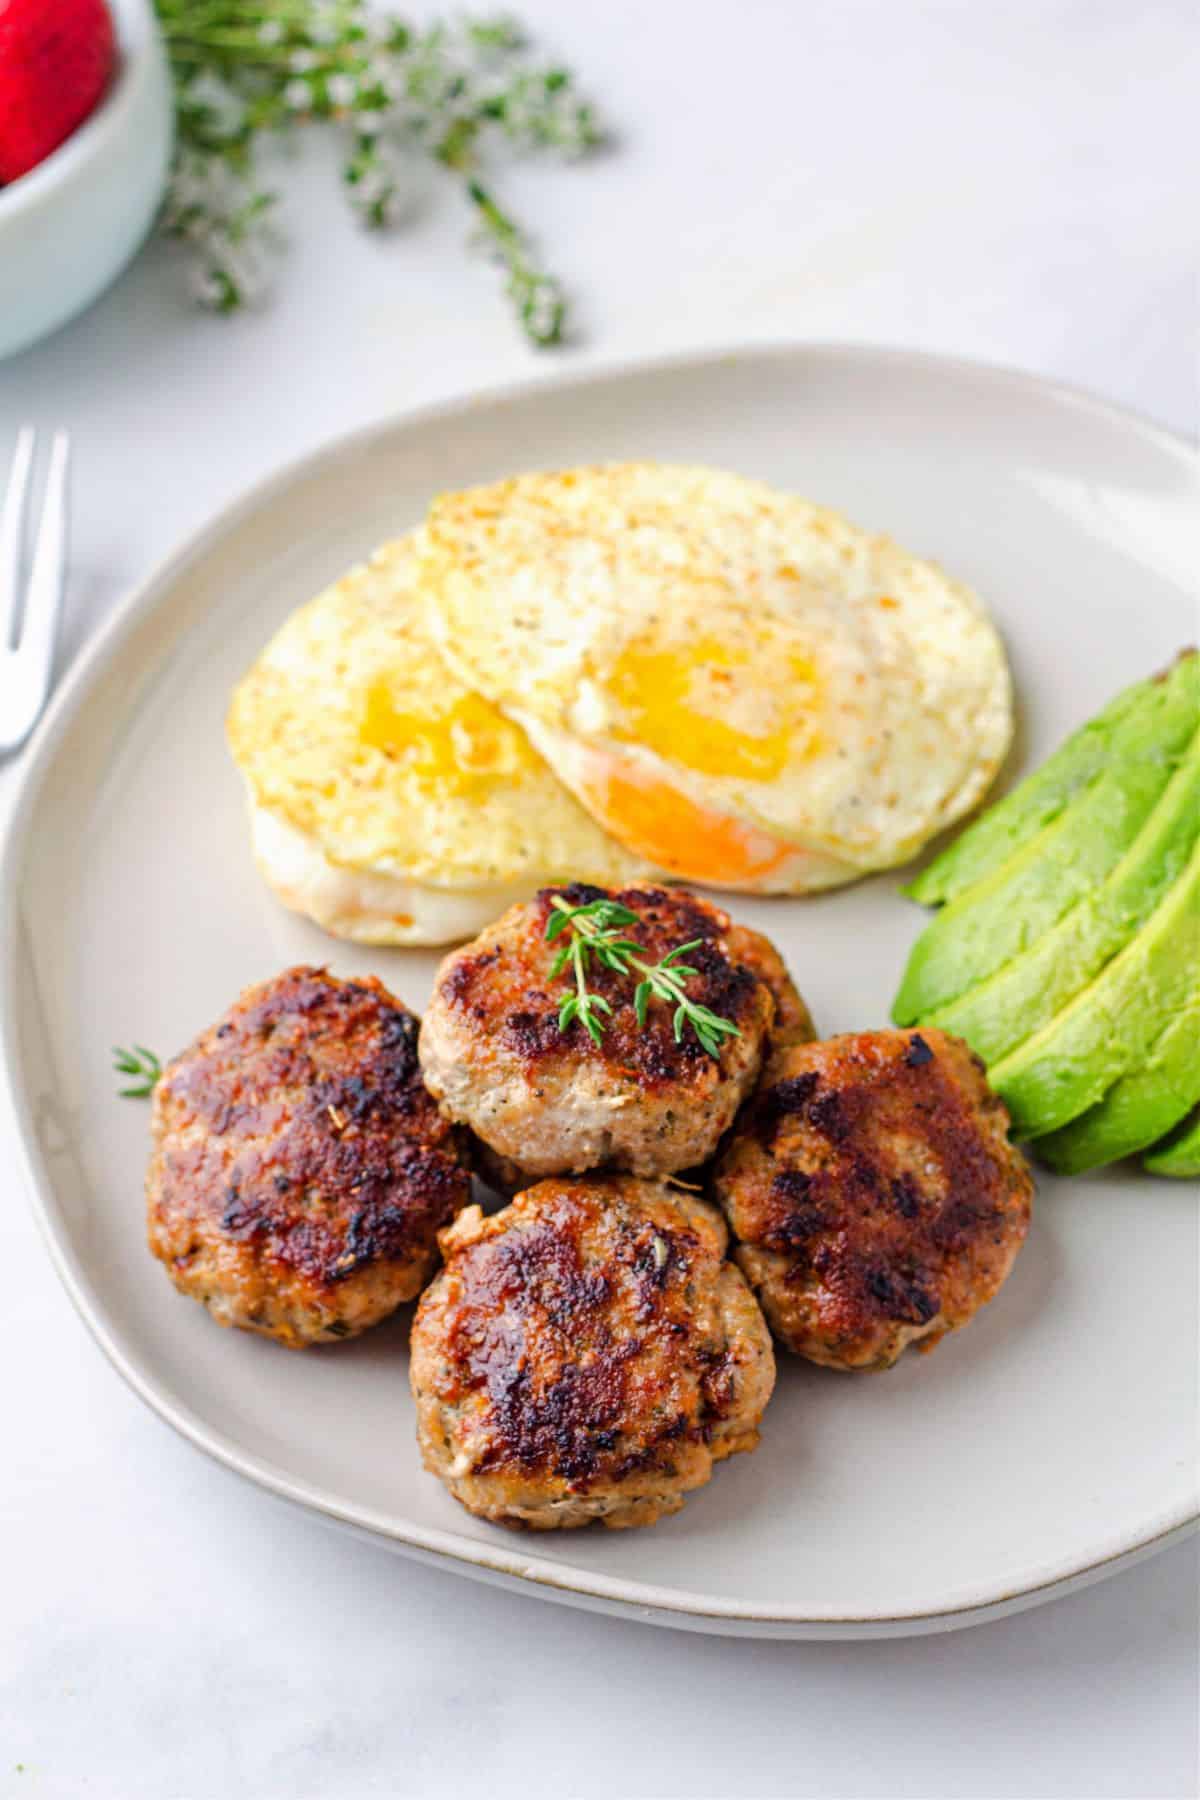 Chicken breakfast Sausages with fried eggs and avocado on the side